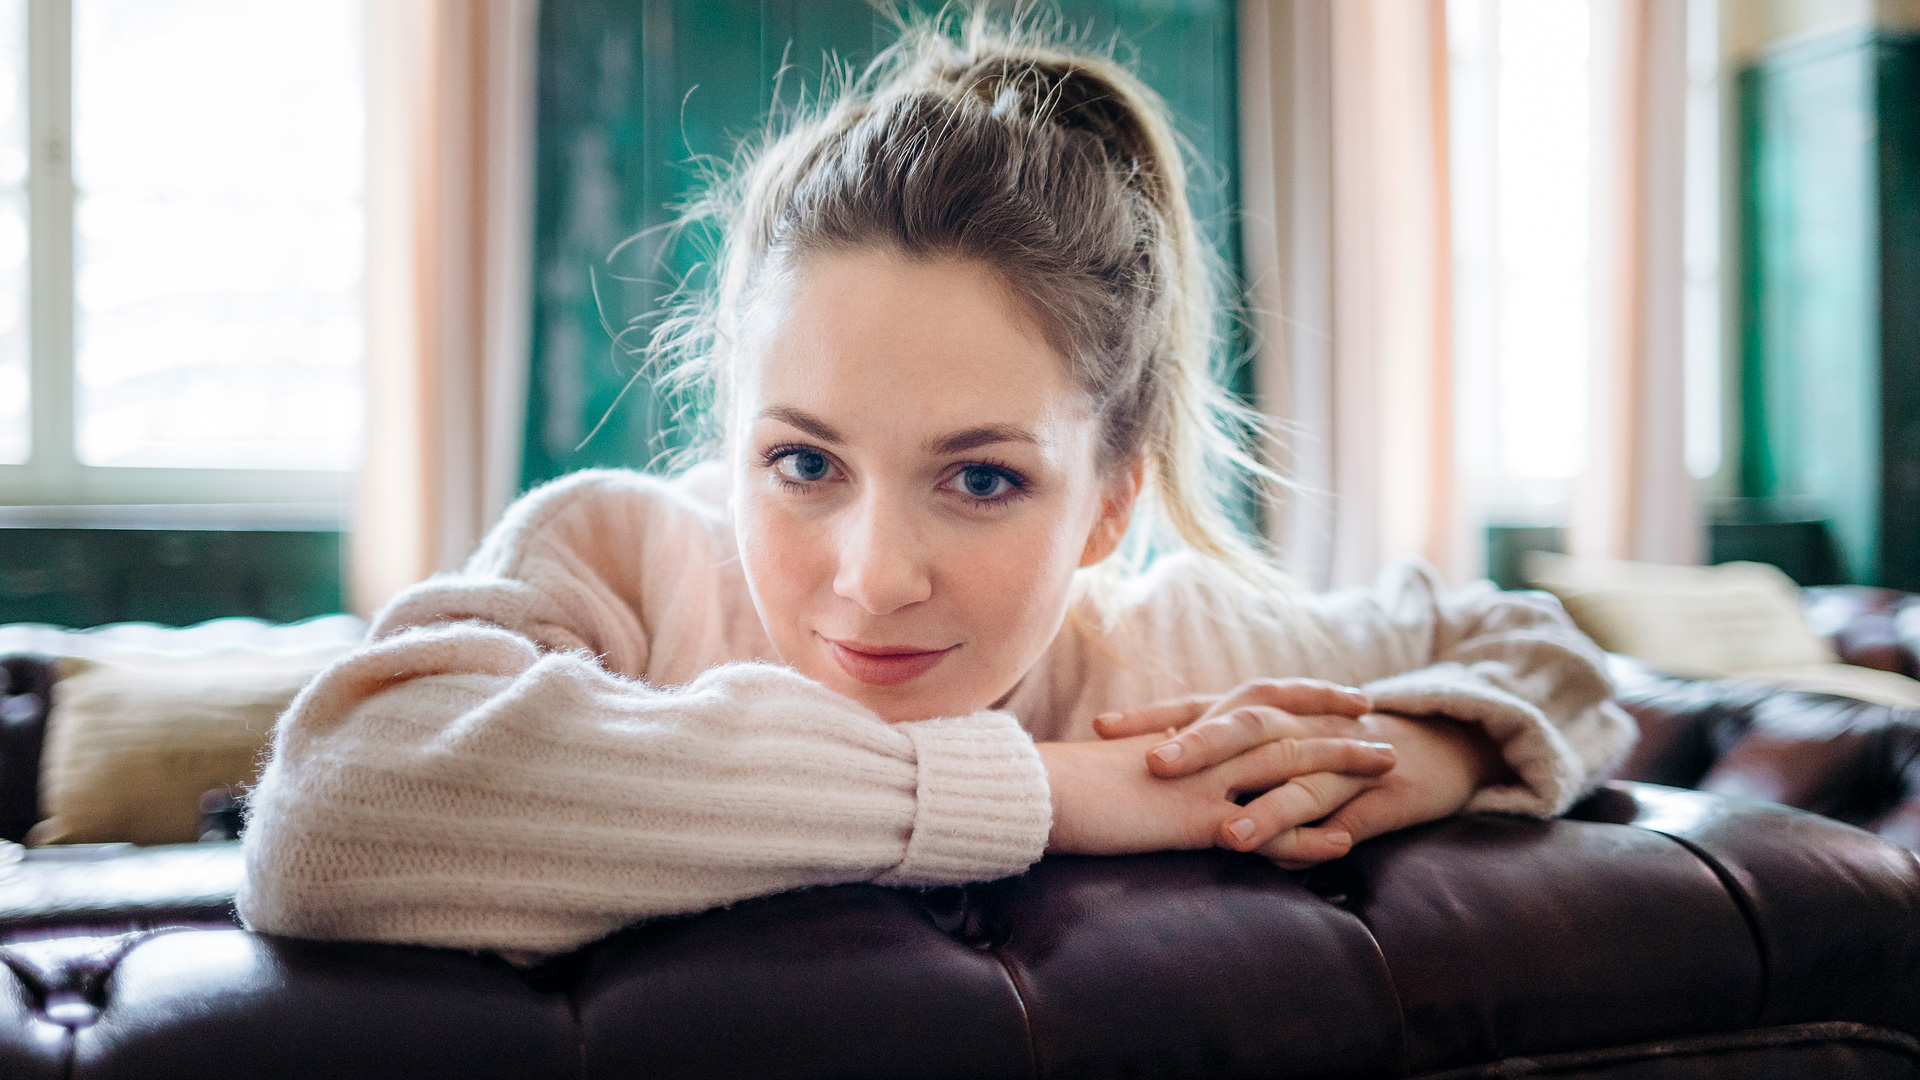 People 1920x1080 women portrait model blonde blue eyes looking at viewer smiling couch depth of field white sweater sweater young women ponytail Jil Funke messy hair women indoors hands crossed window